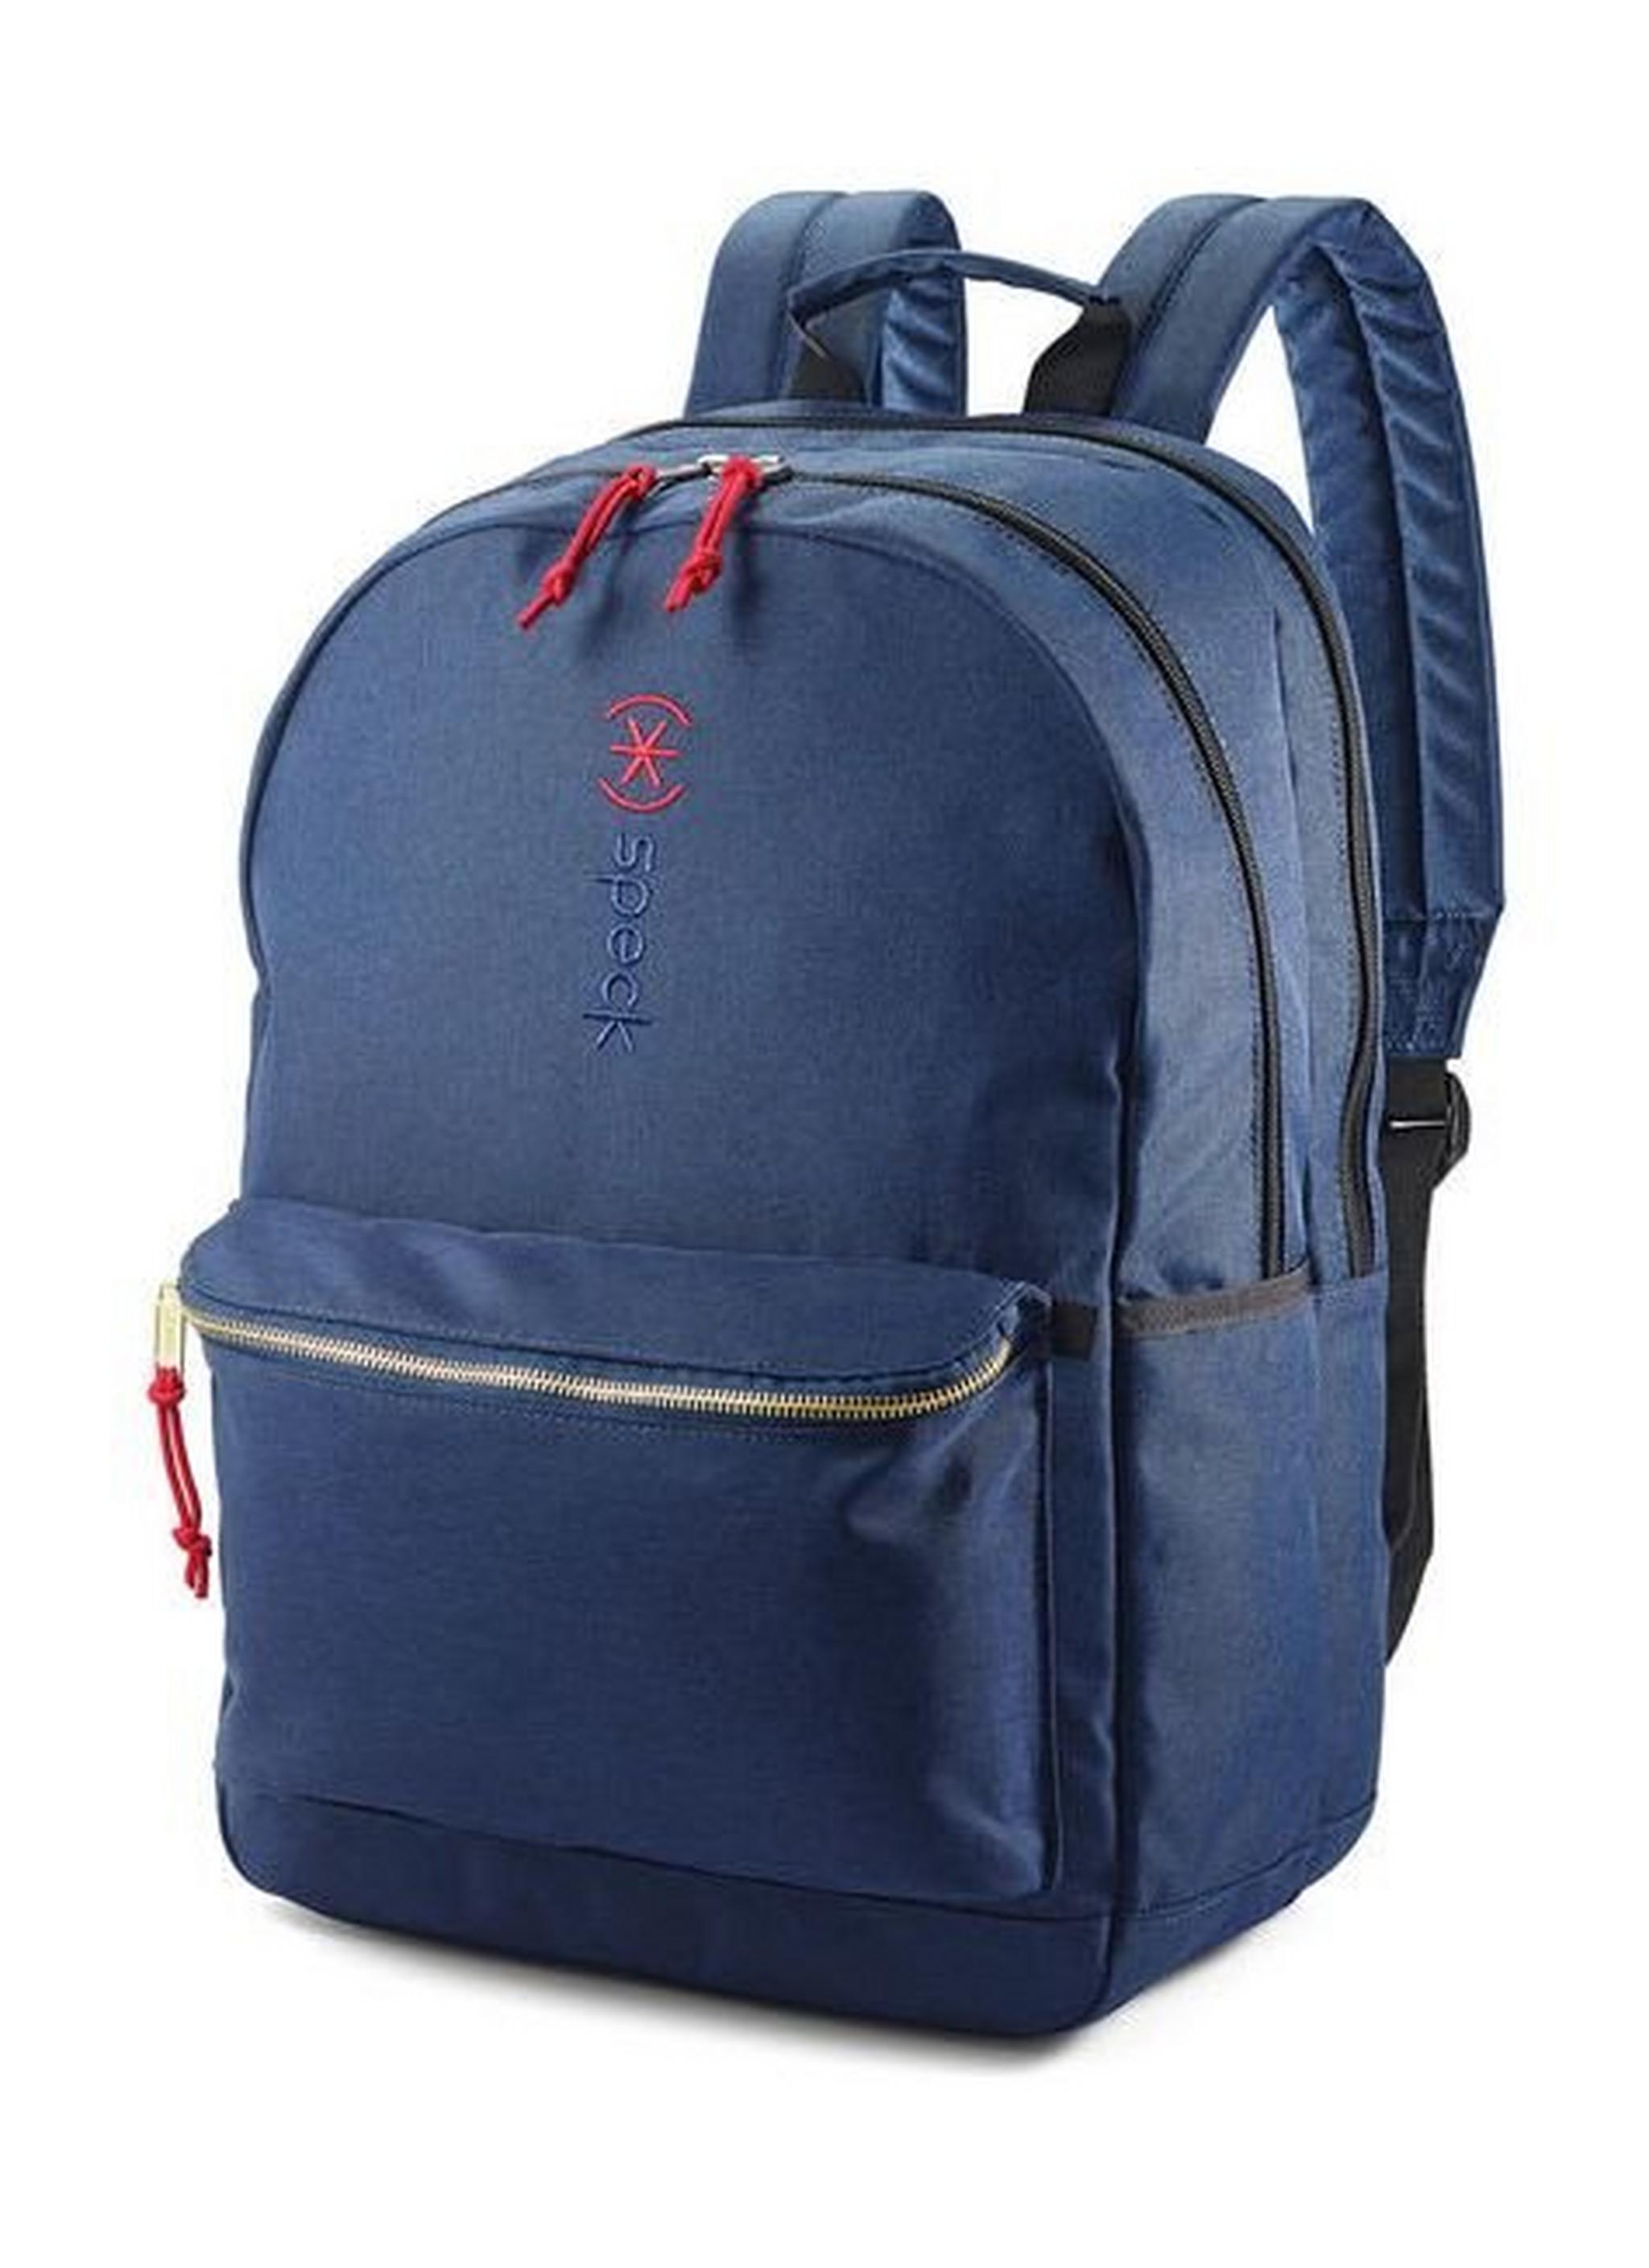 Speck 3 Pointer Classic Backpack For Laptop Up To 15.6 inch - Navy